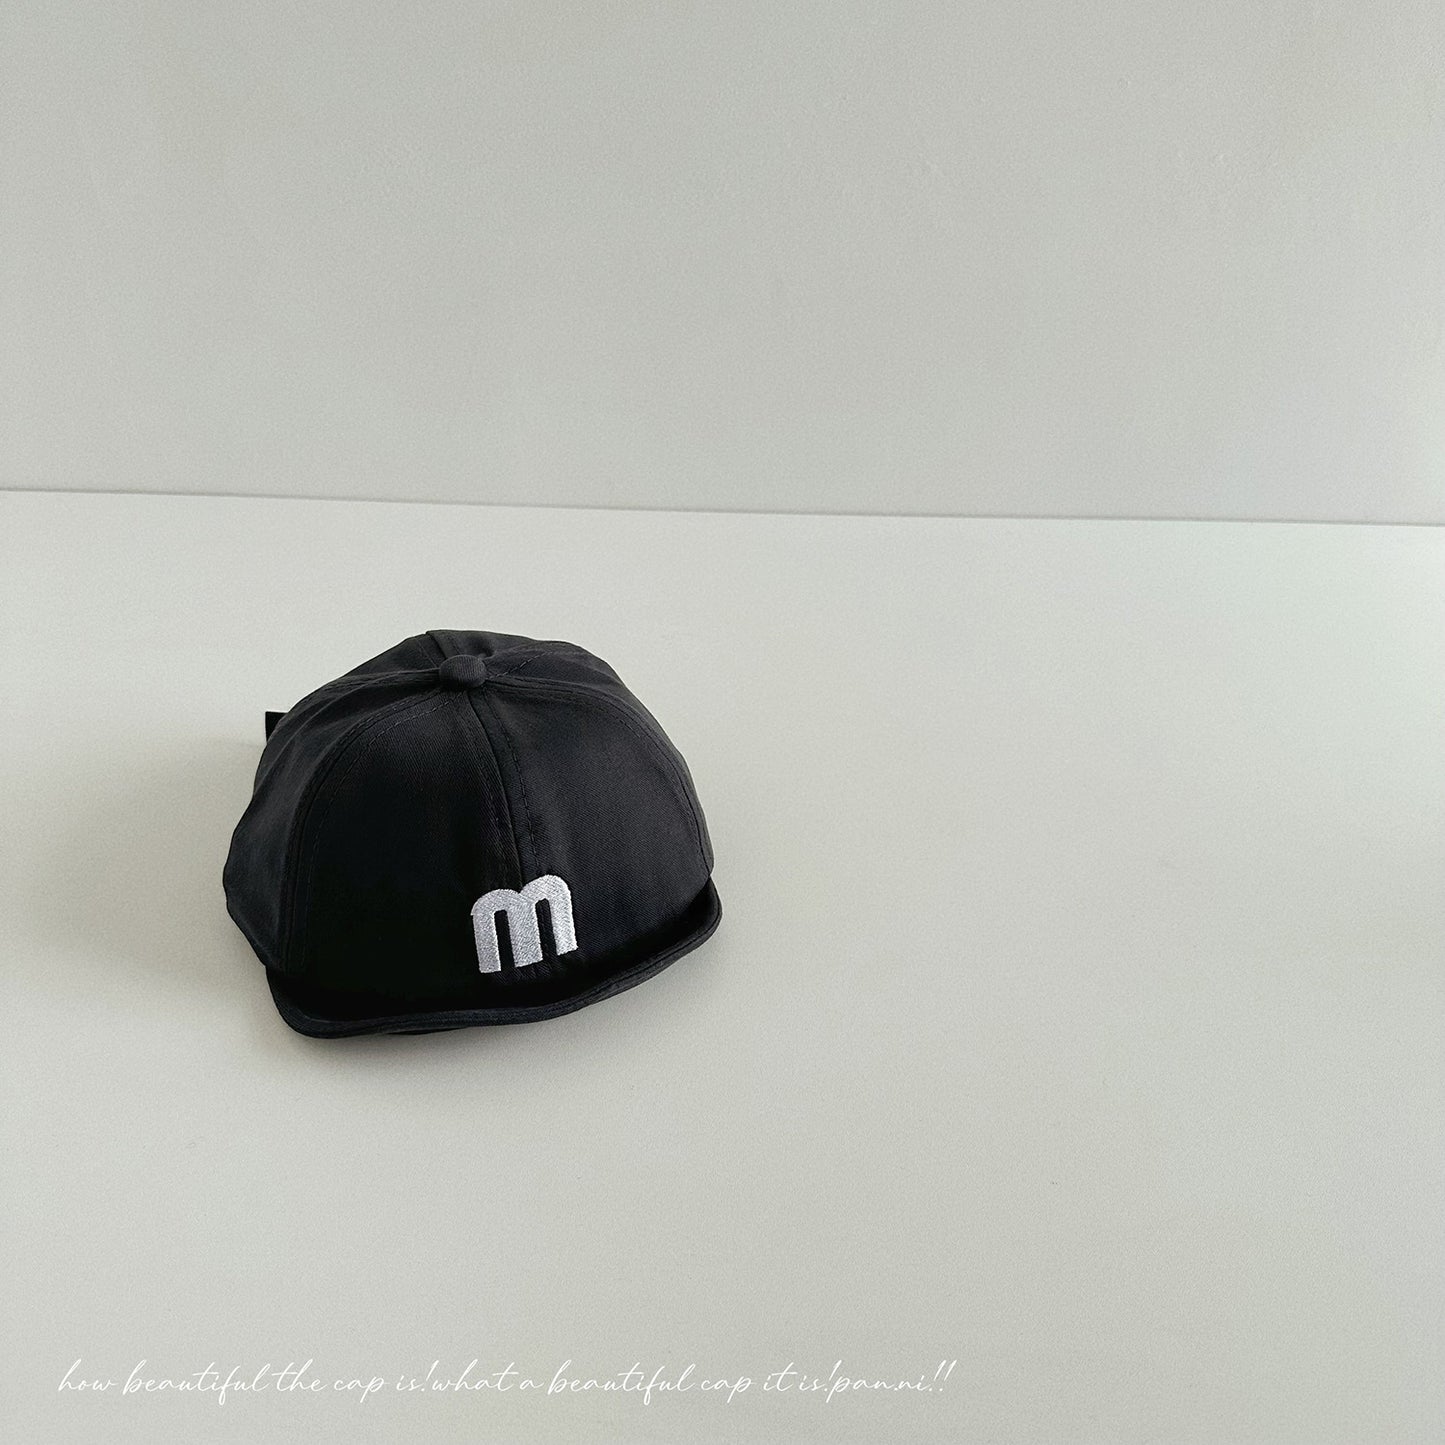 Soft and cute ~ Embroidered baby baseball cap with letter m for boys and girls in spring and summer, versatile soft brim children's sun protection hat